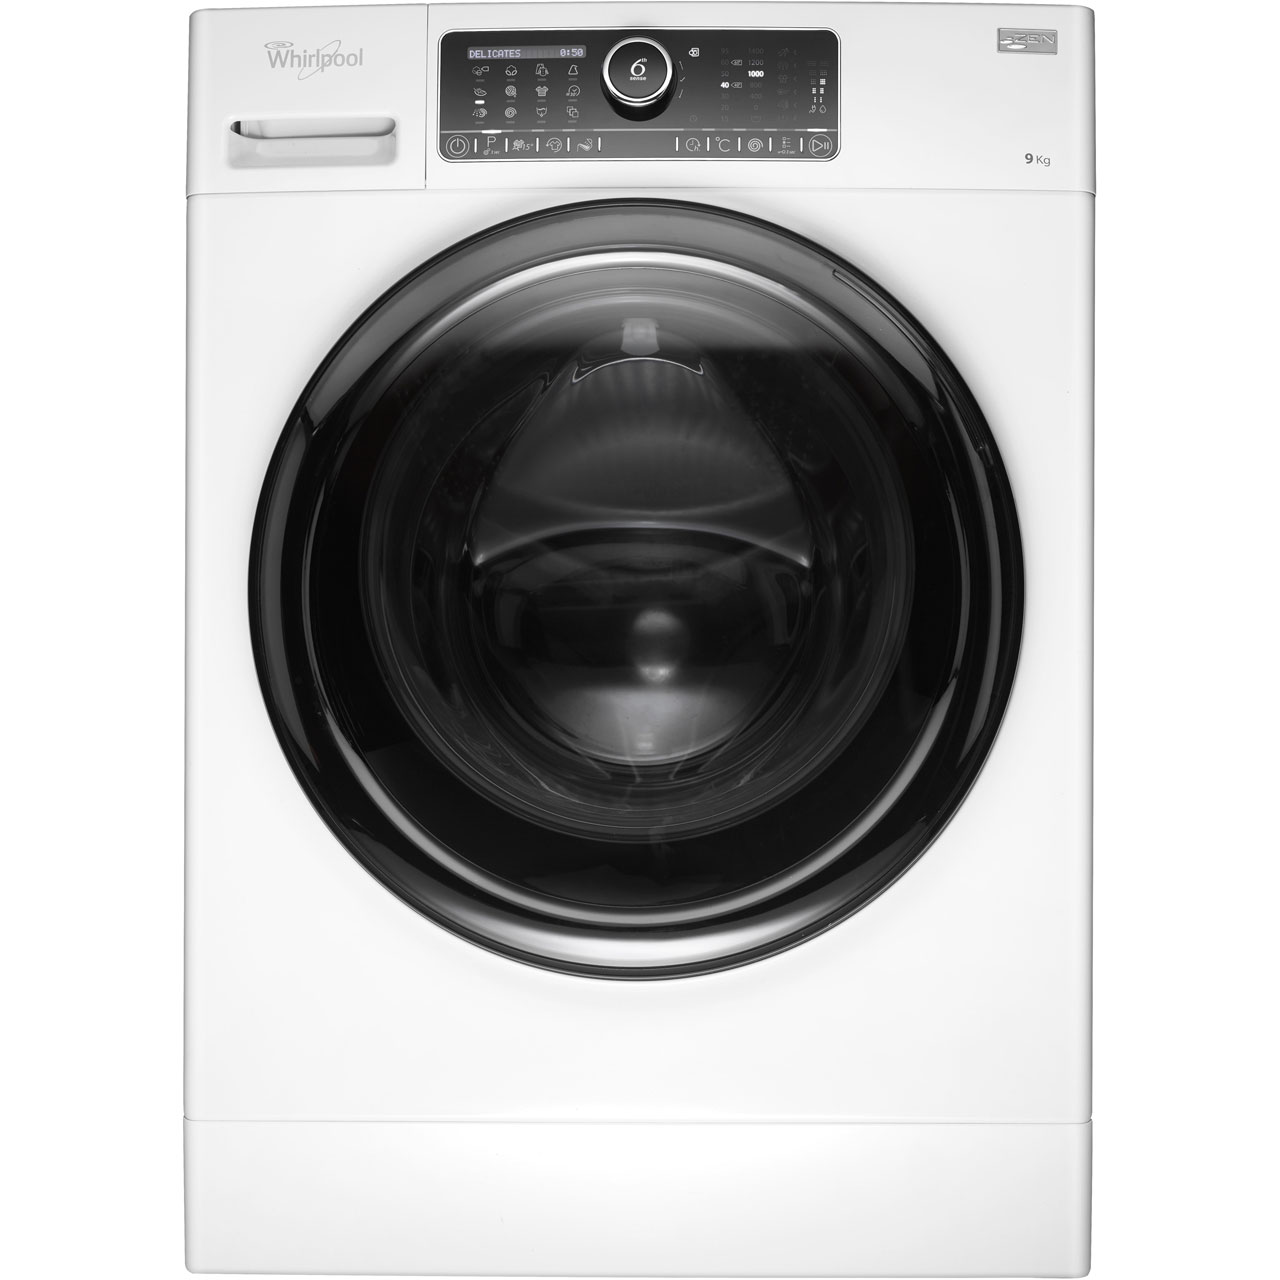 Whirlpool FSCR90430 9Kg Washing Machine with 1400 rpm Review